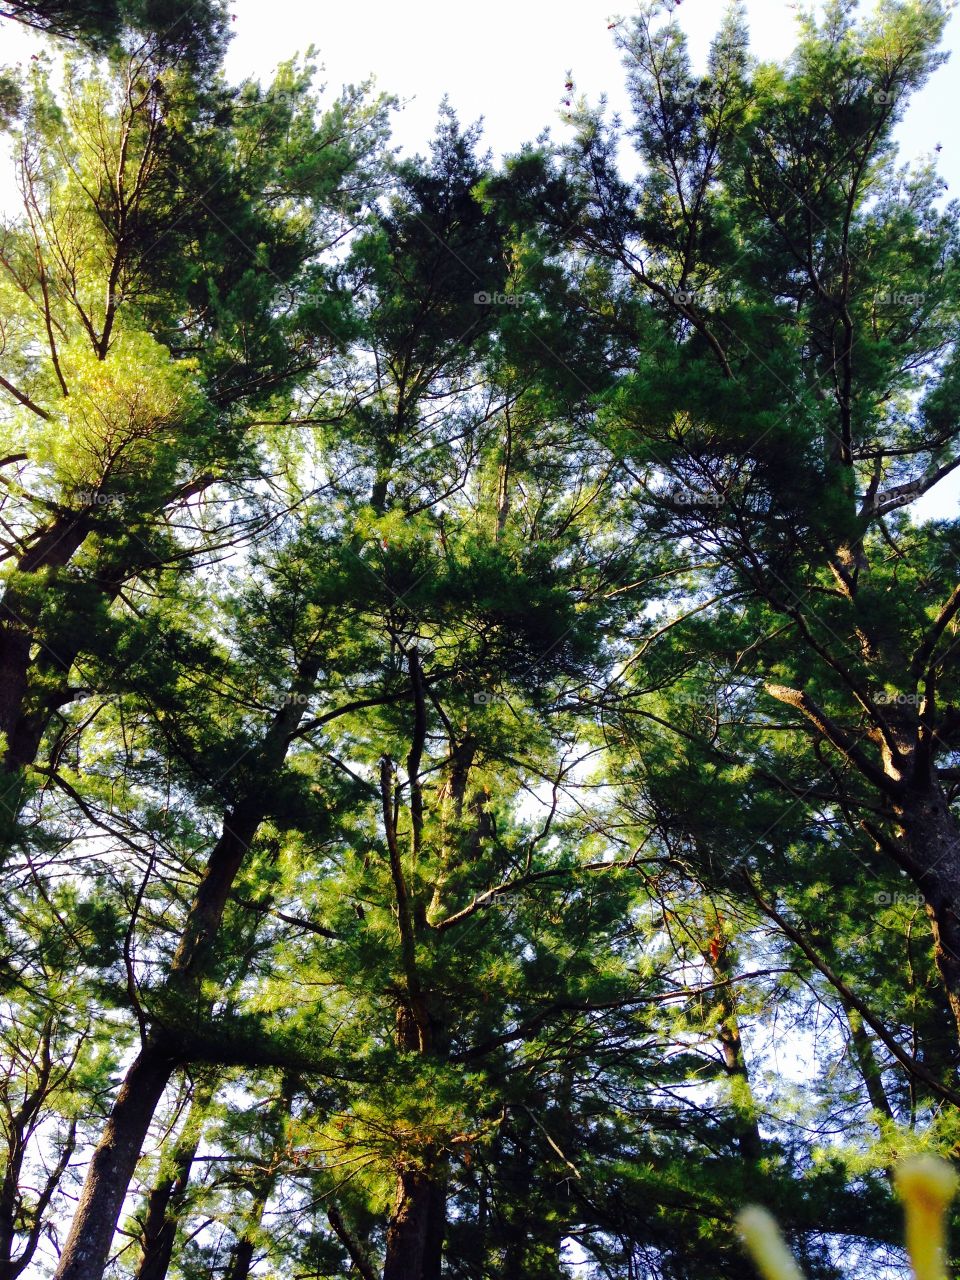 Pine Grove Canopy wShadows. Looking Up into our pine grove canopy as the sun cast shadows made for a pretty picture. Nice Mission!